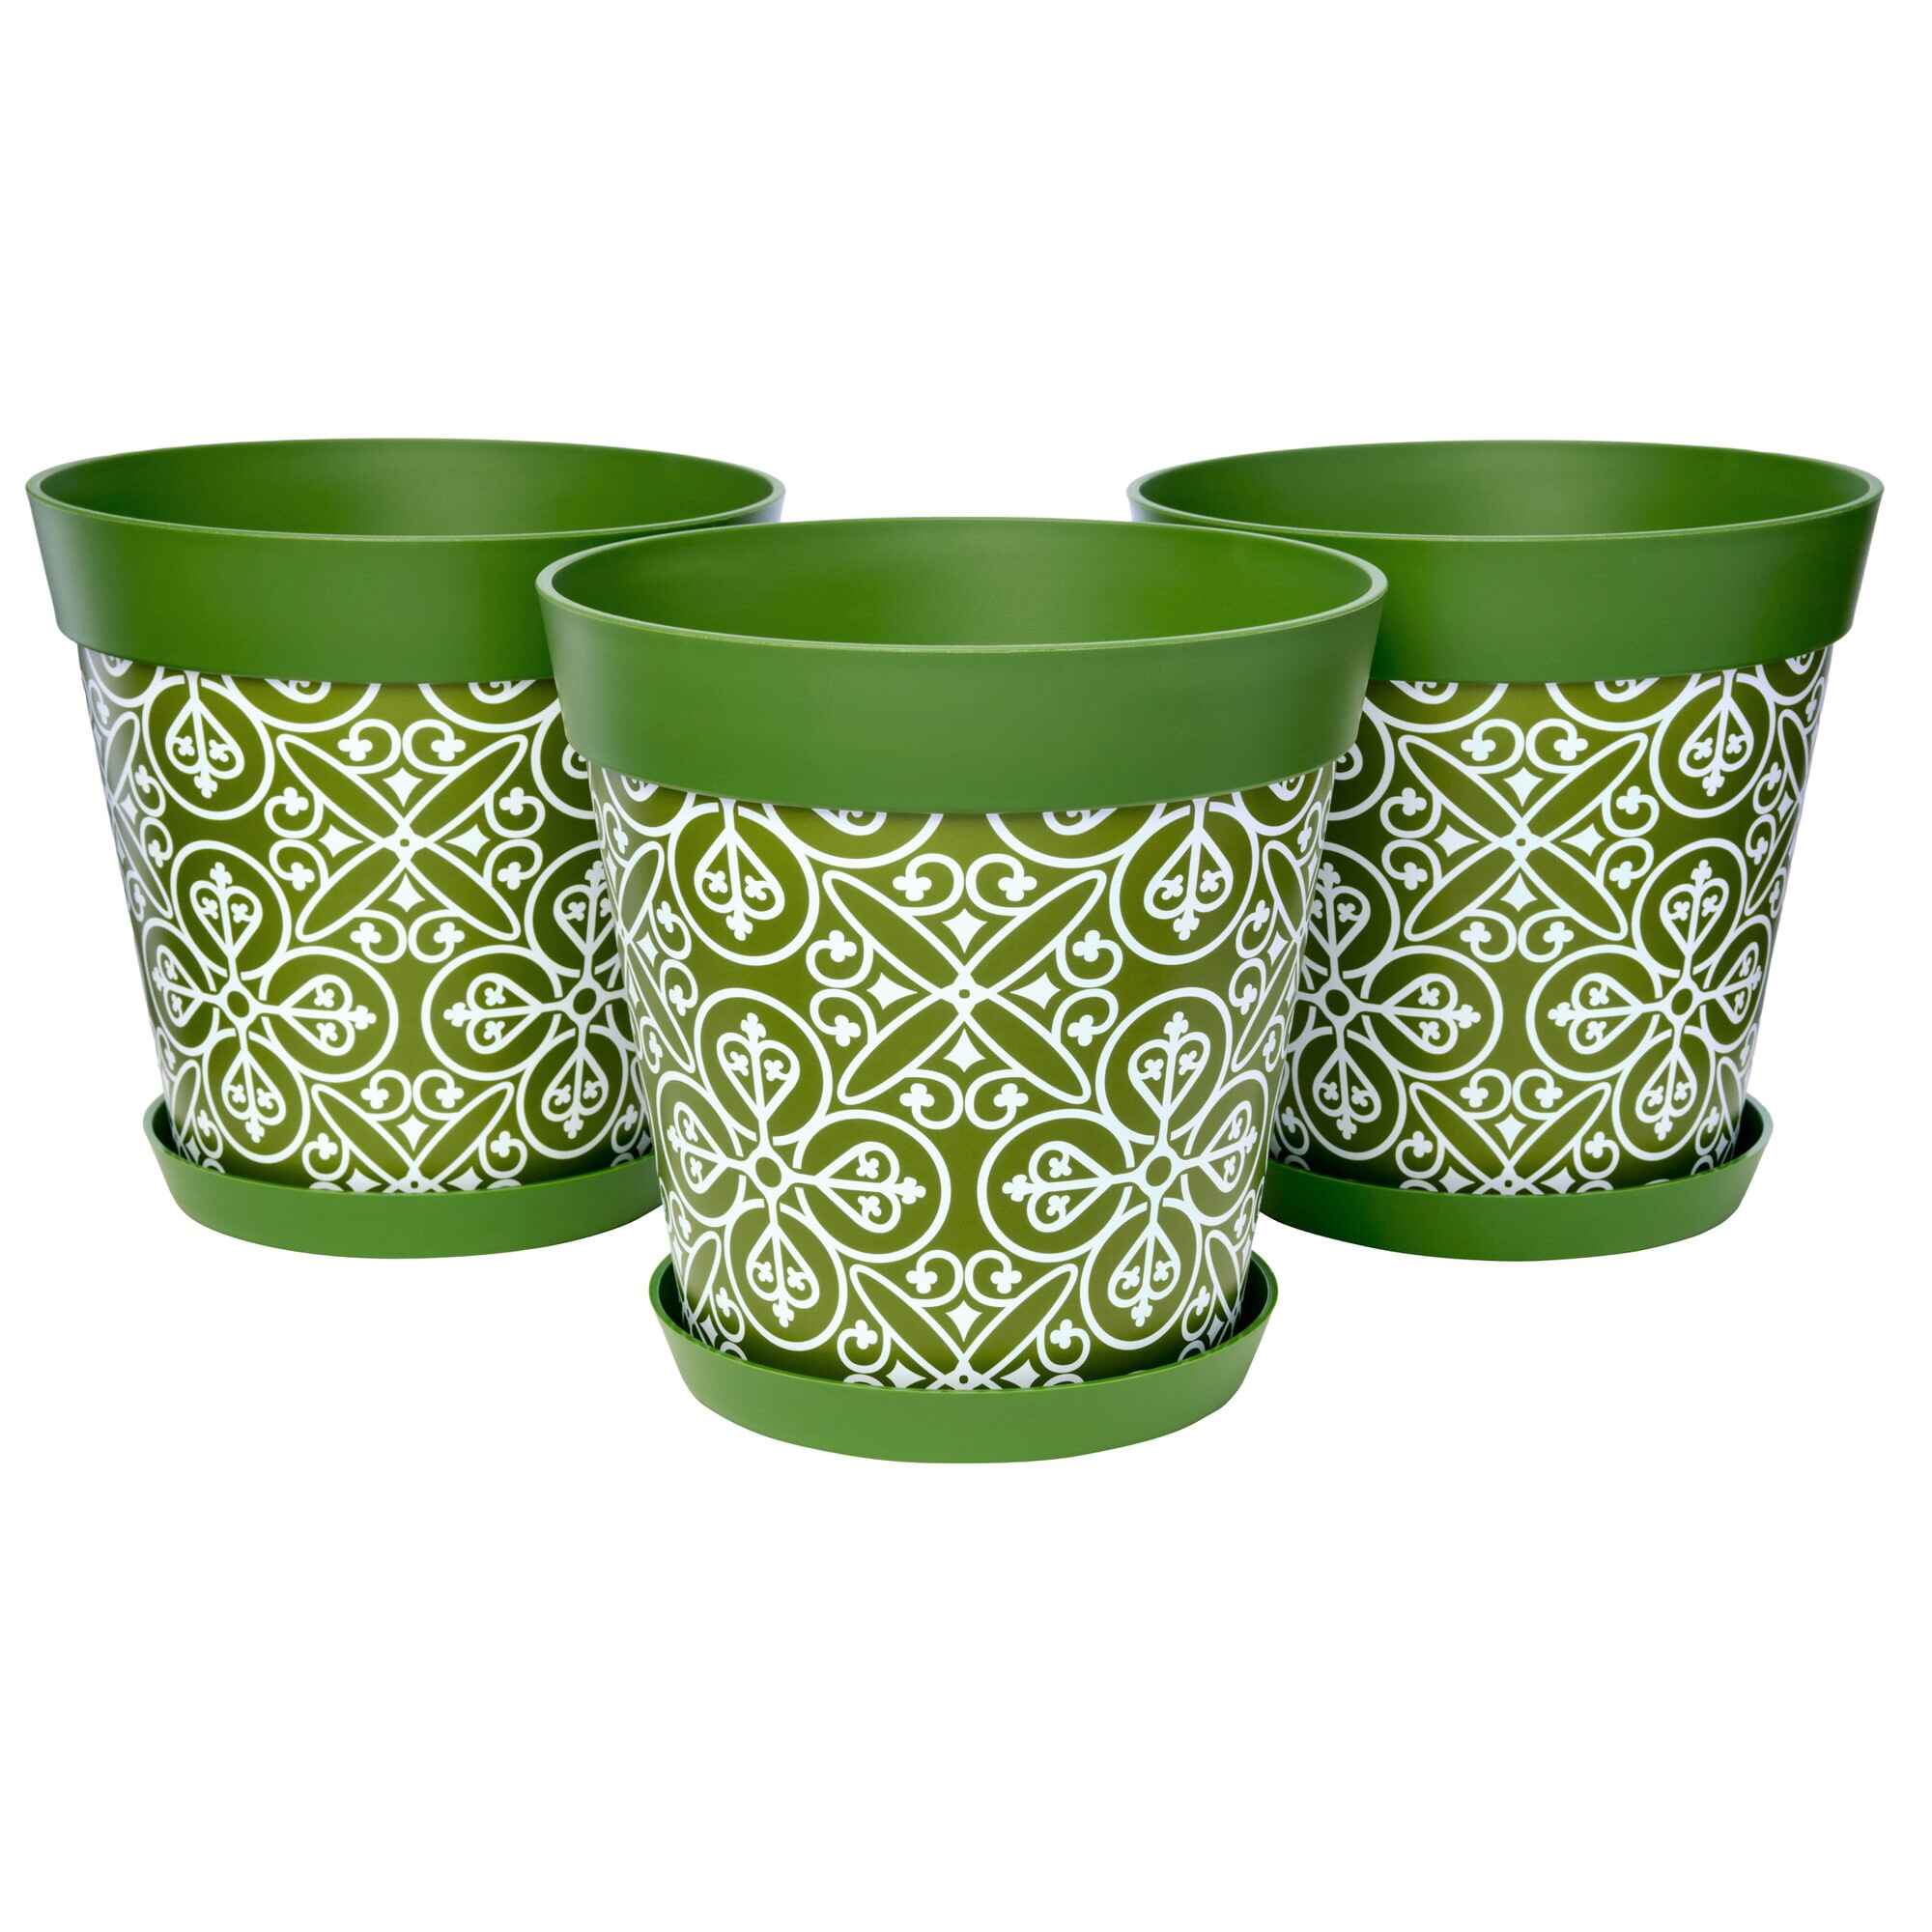 Picture of 3 Large 25cm Green Moroccan Style Indoor/Outdoor Flower Pot and Saucers 